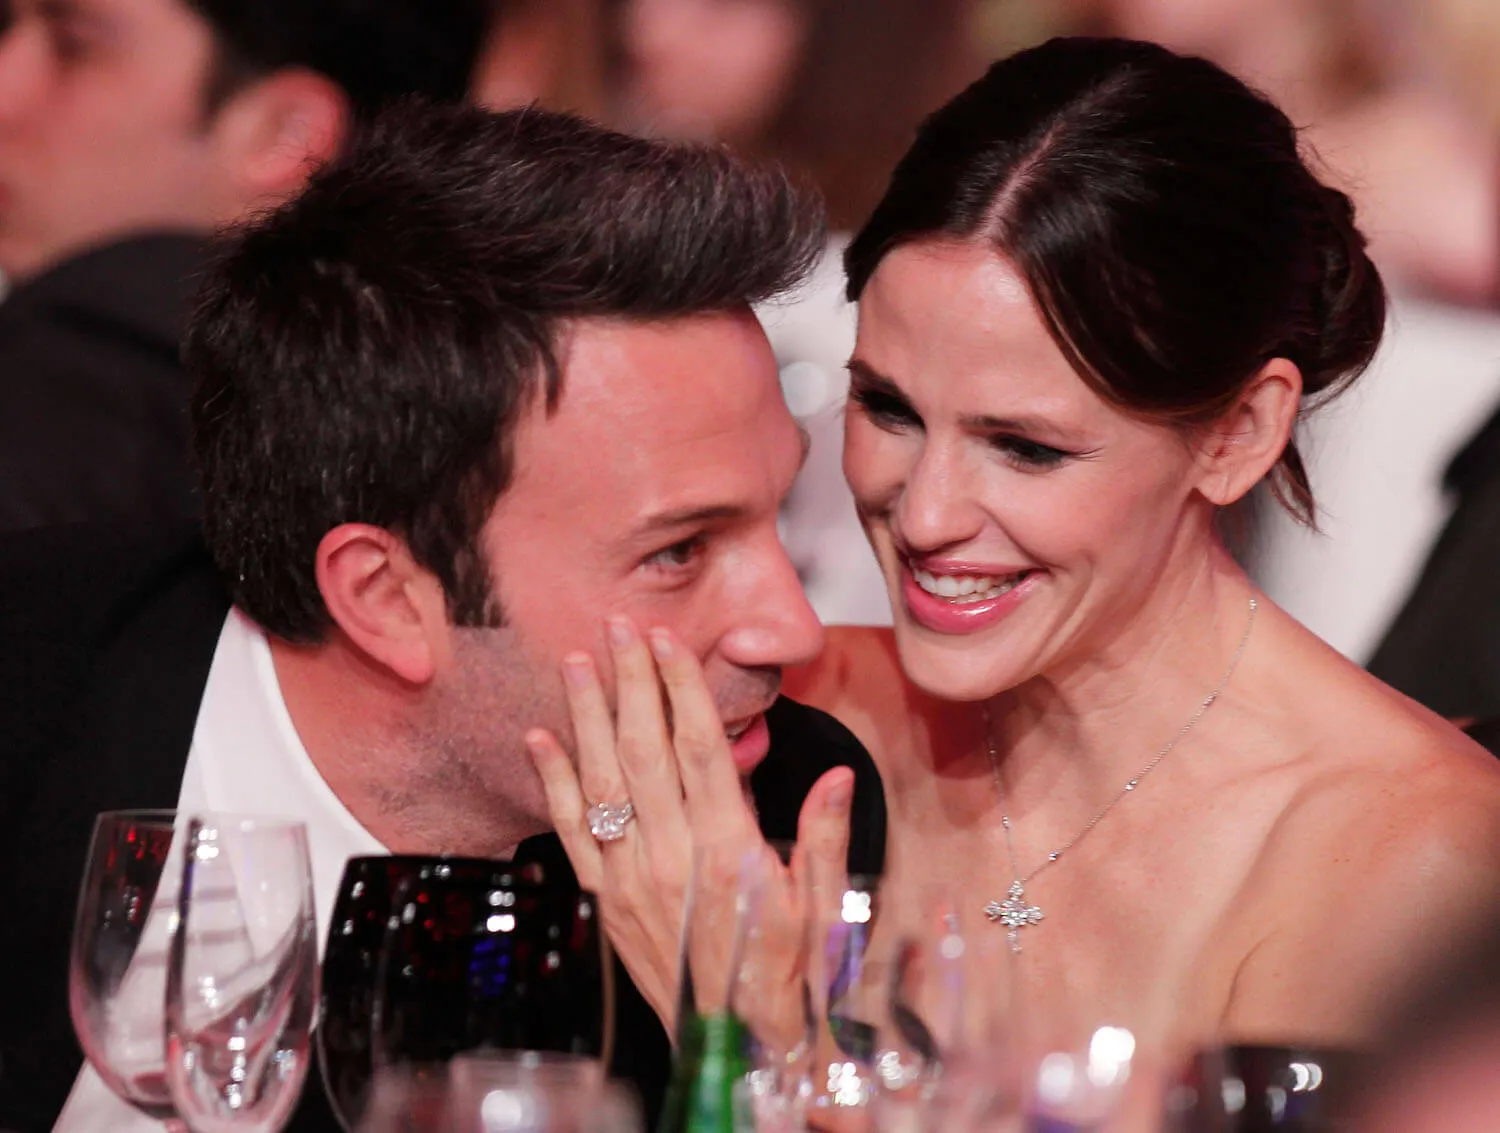 Jennifer Garner smiling and cupping Ben Affleck's face during the 16th annual Critics' Choice Movie Awards in 2011